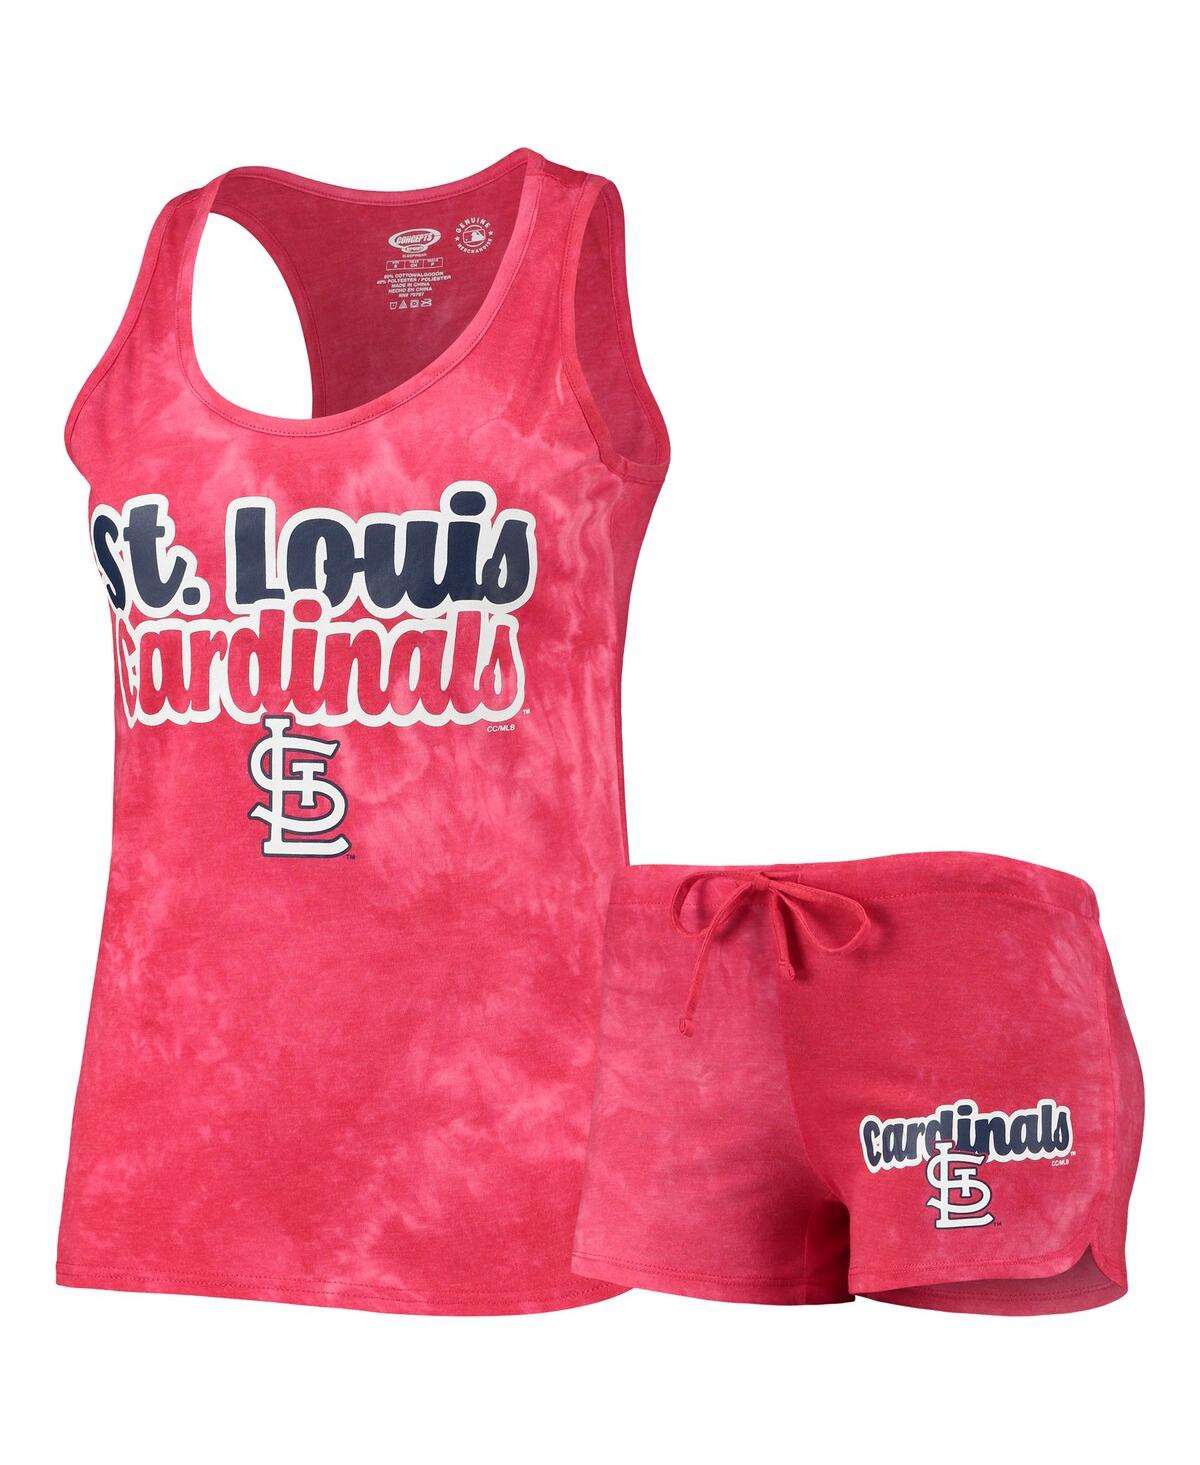 CONCEPTS SPORT WOMEN'S CONCEPTS SPORT RED ST. LOUIS CARDINALS BILLBOARD RACERBACK TANK TOP AND SHORTS SET